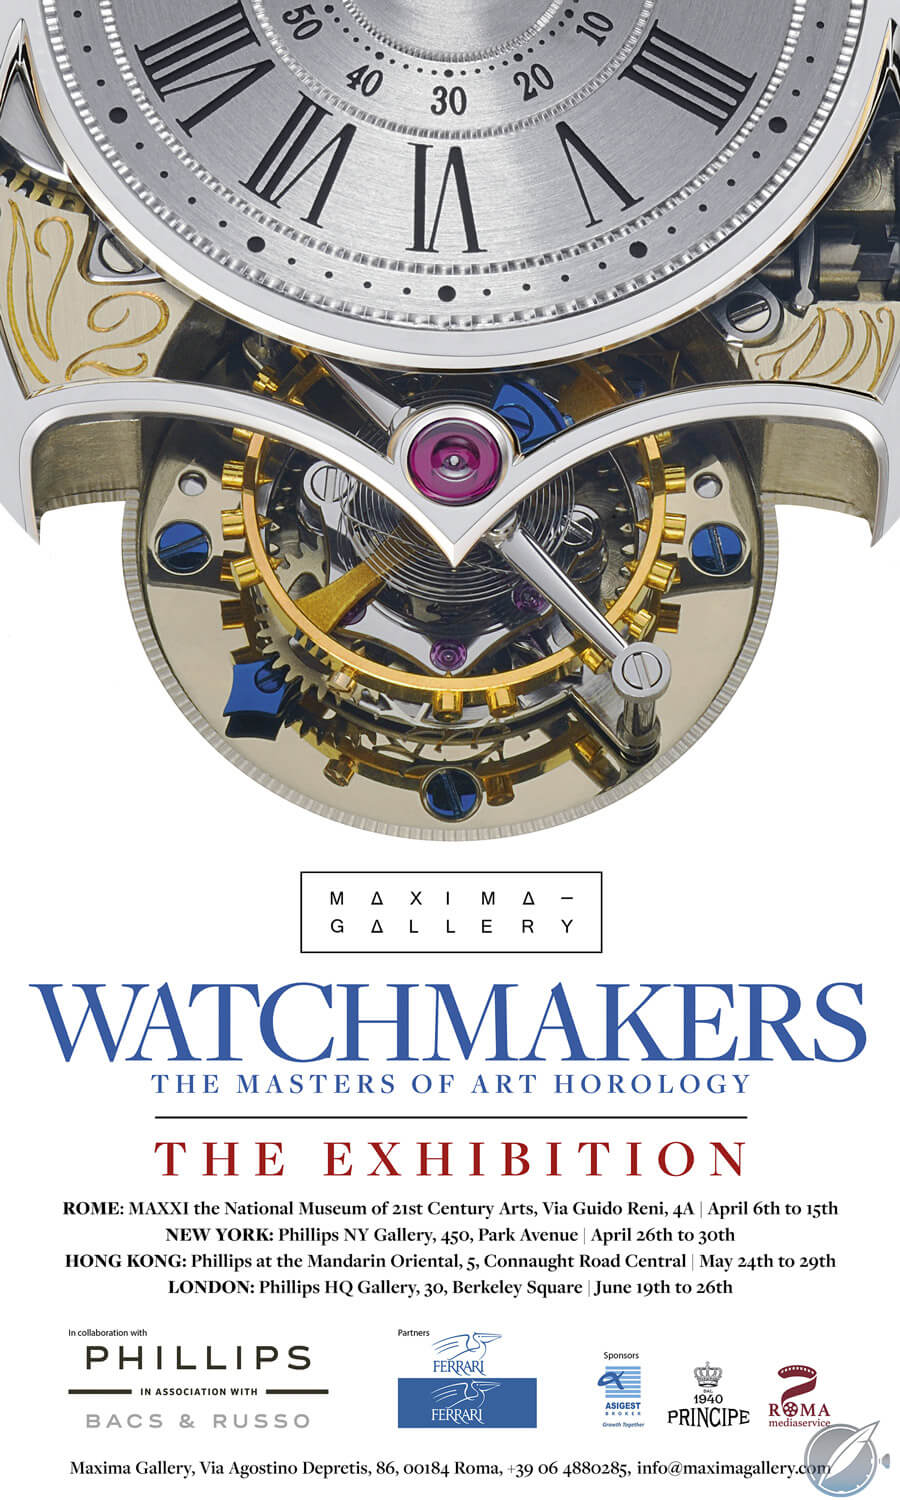 Watchmakers: The Masters of Art Horology exhibition